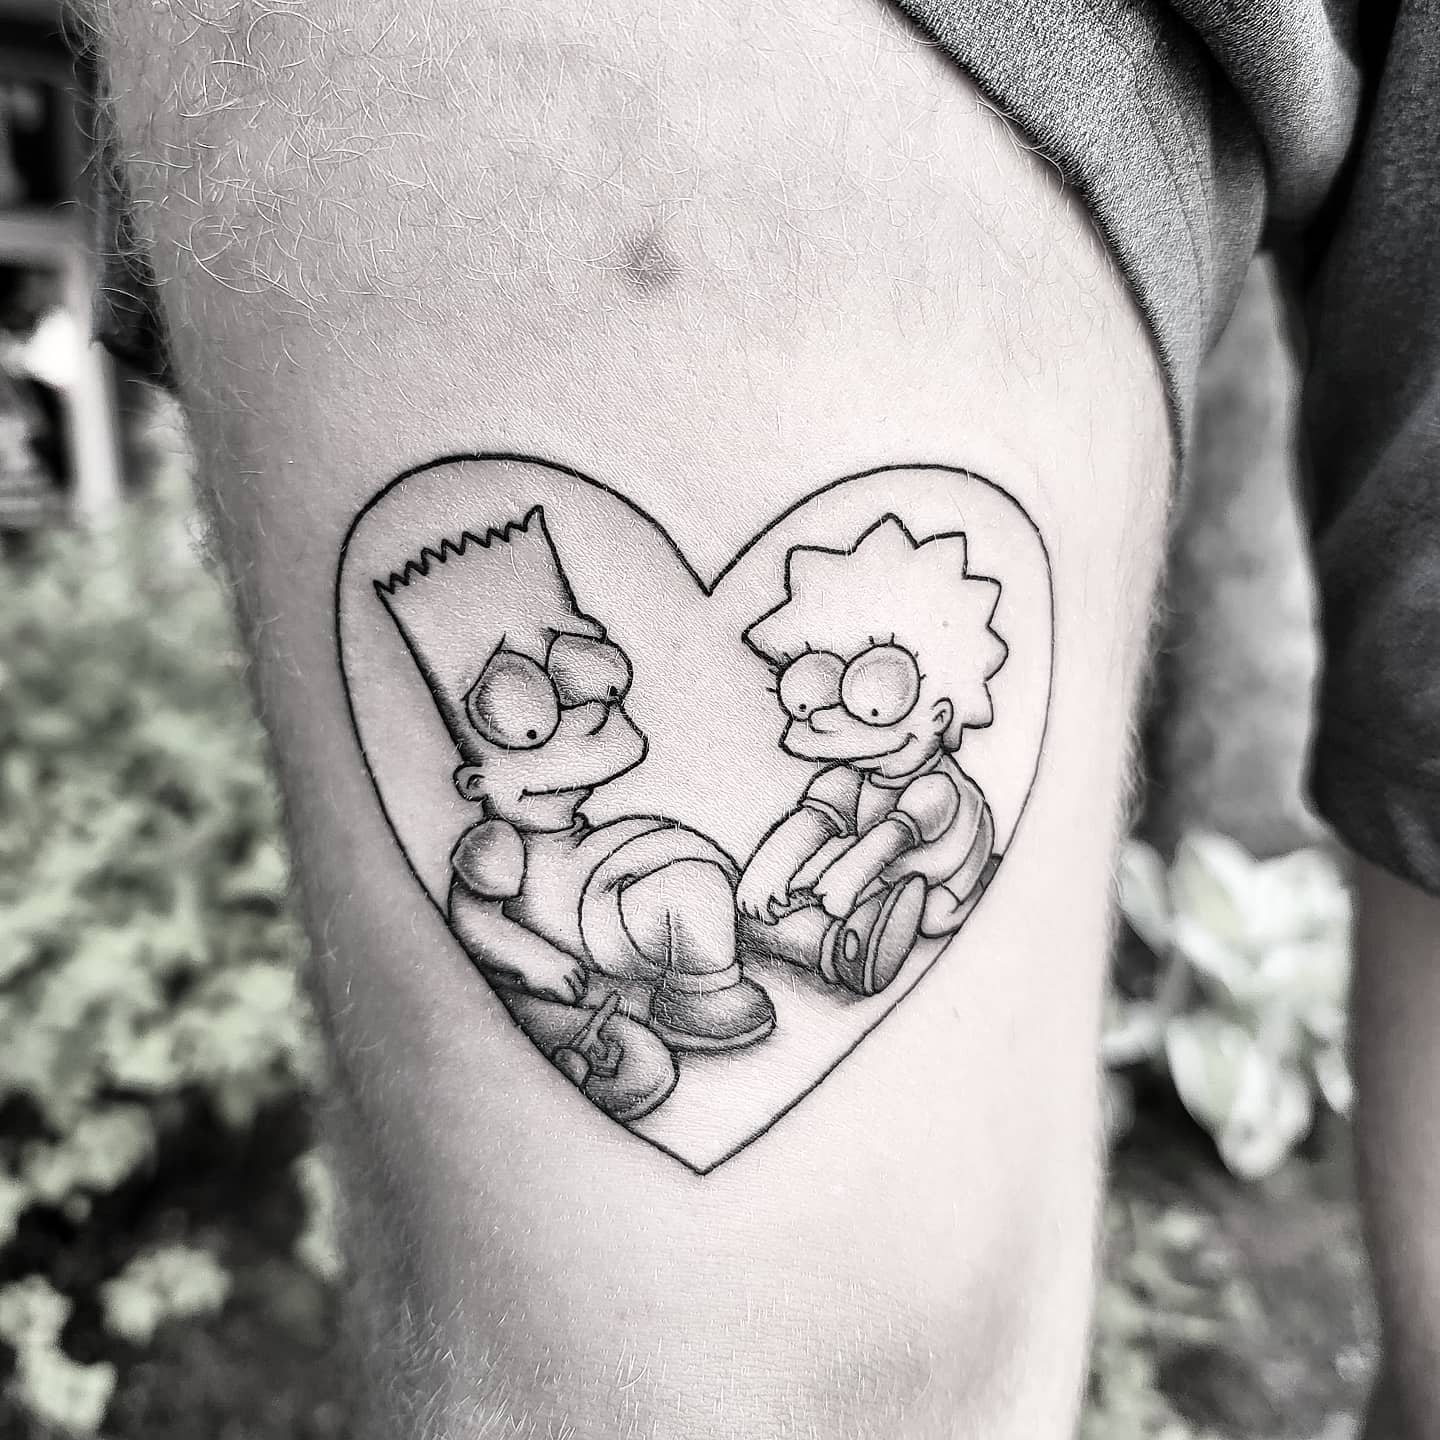 Old School Tattoos on Instagram: “Tag your brother and/or sister 😀👇 -  𝕬𝖗𝖙𝖎𝖘𝖙 𝖘𝖕𝖔𝖙𝖑𝖎𝖌𝖍?… | Brother tattoos, Matching brother tattoos,  Picture tattoos